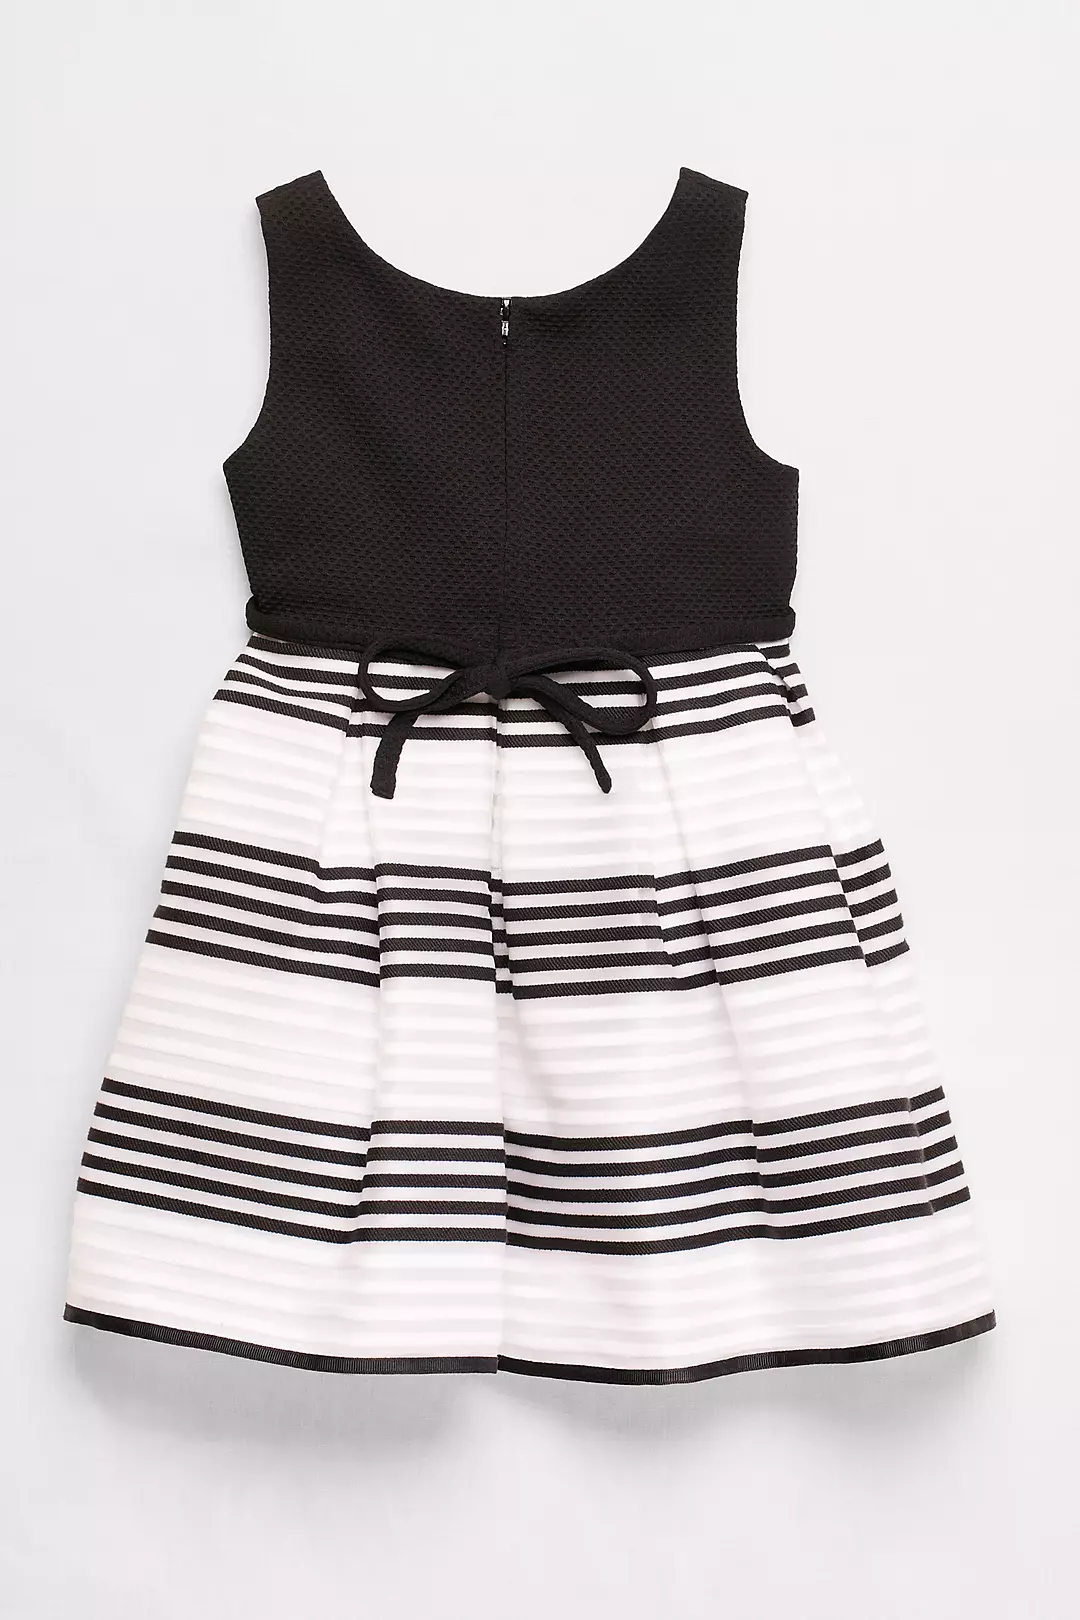 Striped Skirt Fit and Flare Dress with Beaded Belt Image